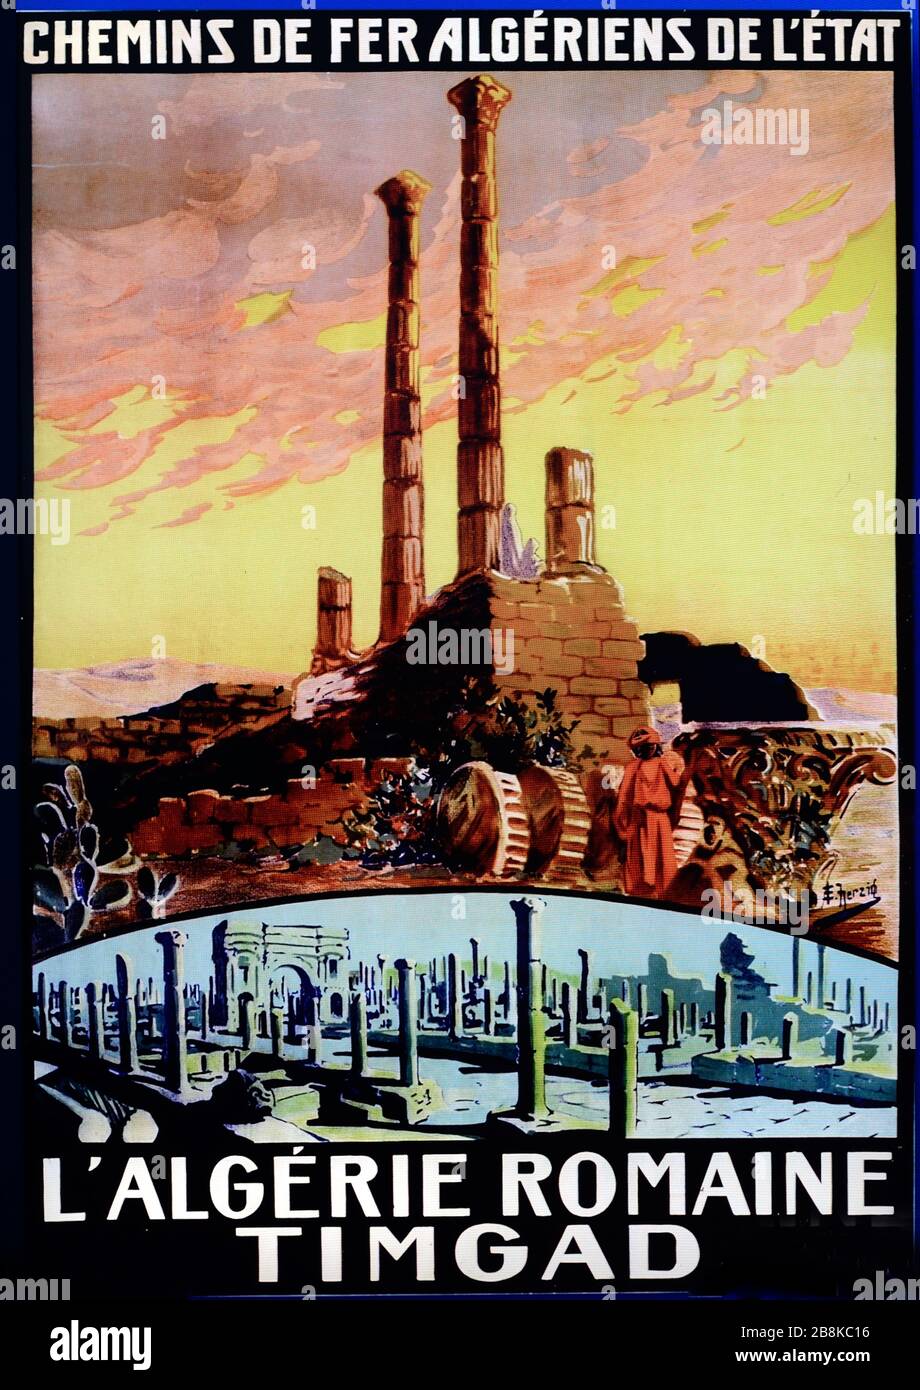 Classical Remains of the Roman City of Timgud Algeria Portrayed in a Vintage PLM Poster, Tourist Advert or Illustration by Roger Borders from the early c20th Stock Photo